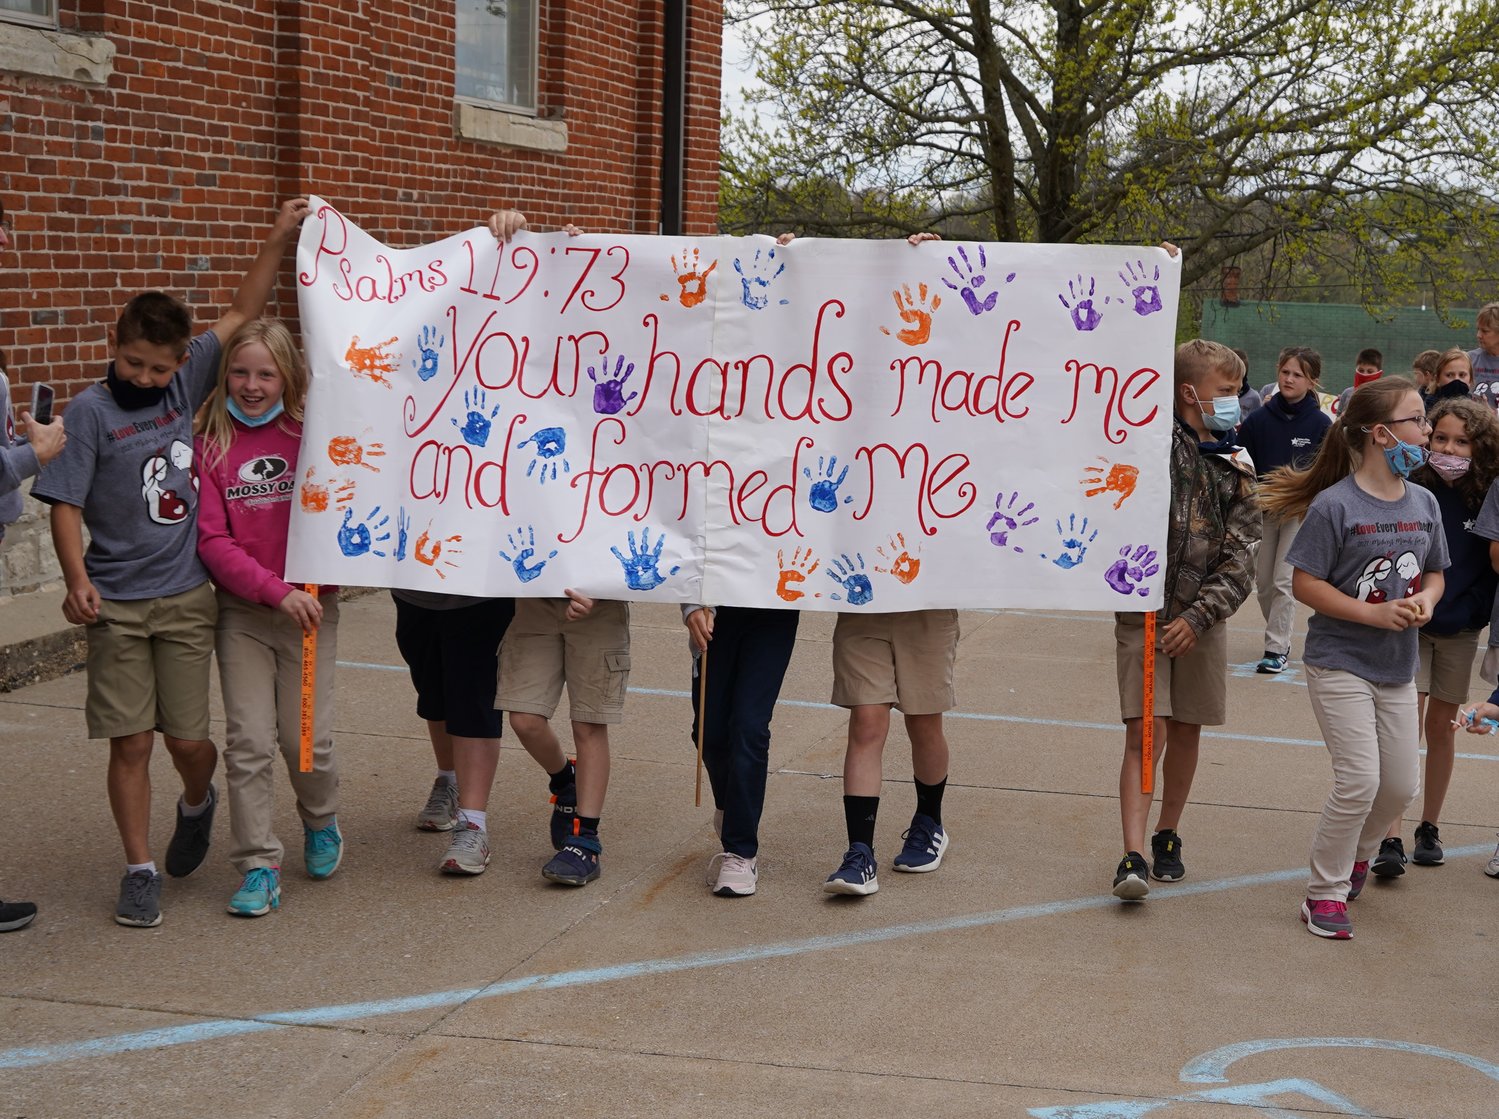 Students of Immaculate Conception School in Loose Creek carry signs and banners around the school and churchyard during a “mini march” for life on April 16.